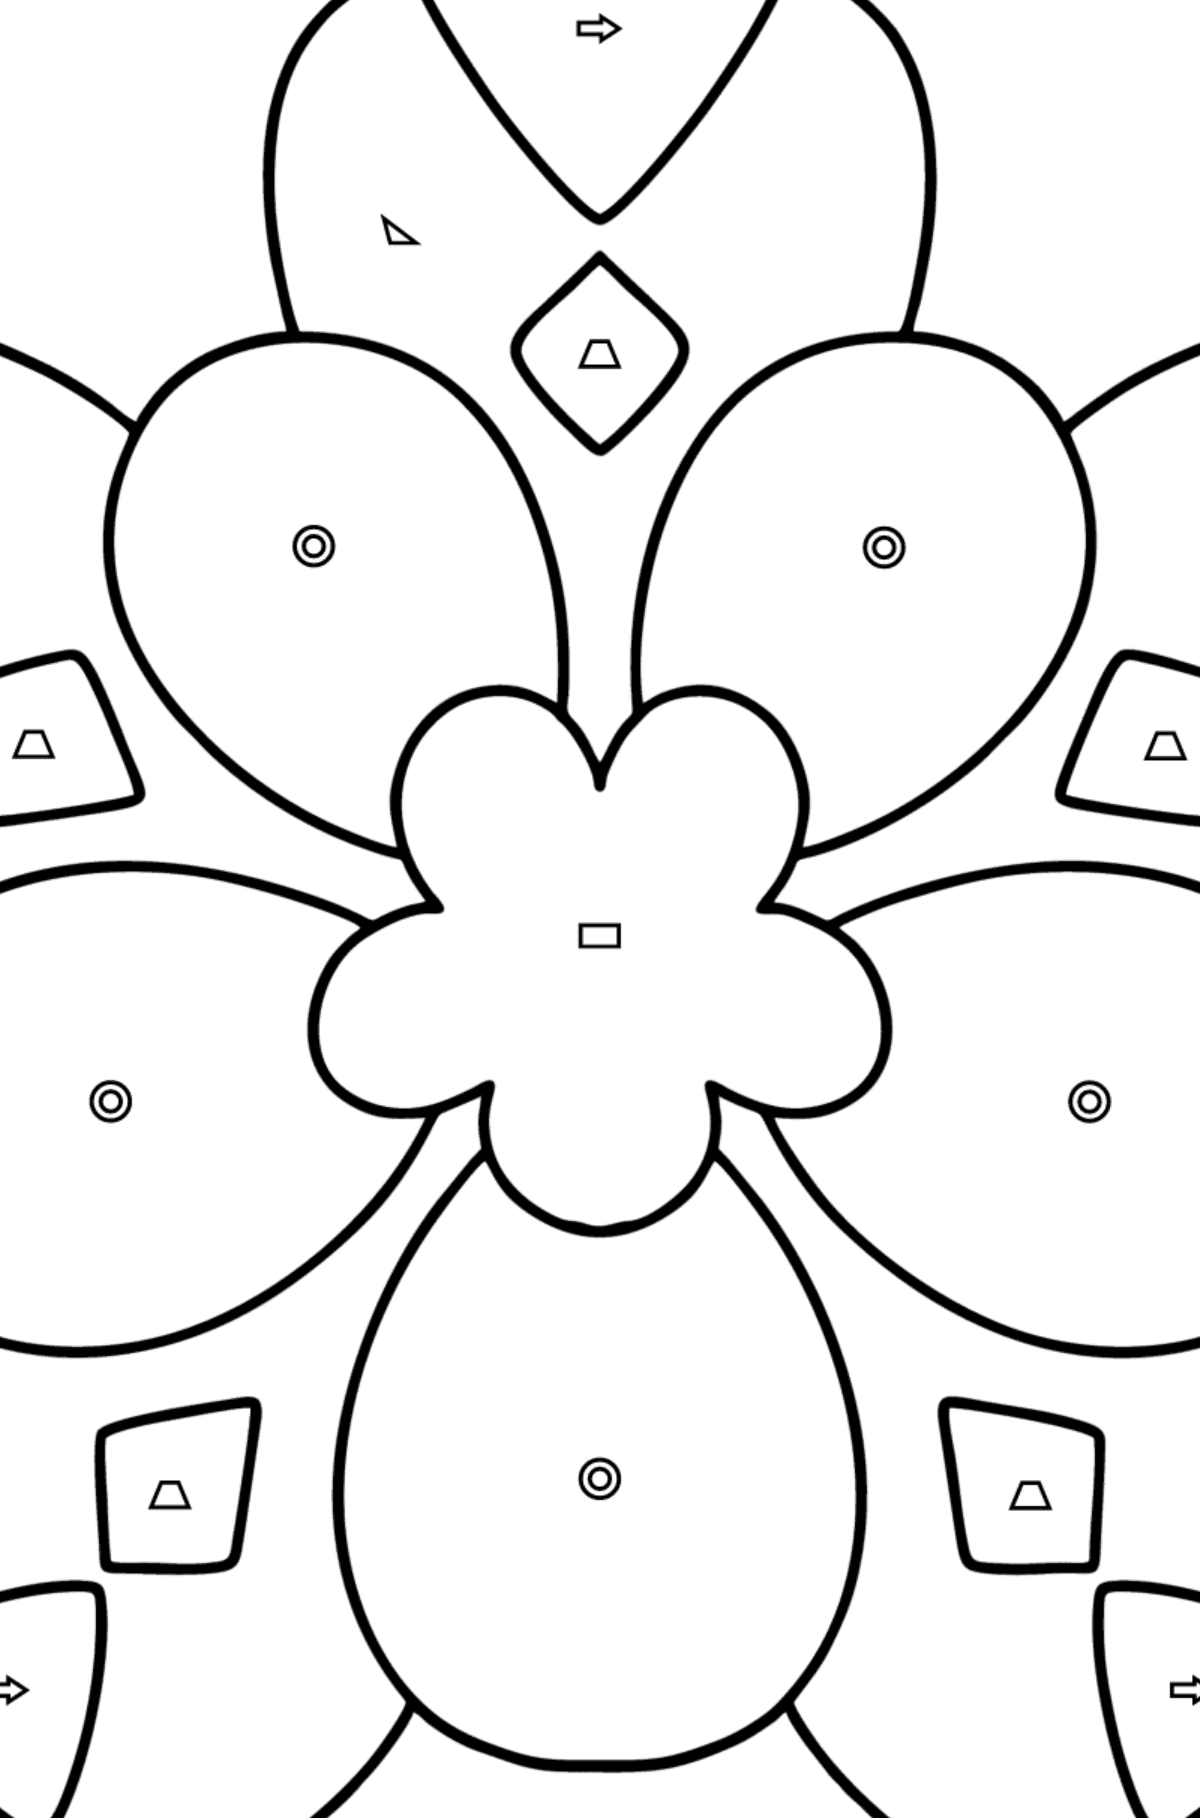 Anti stress Heart coloring page - Coloring by Geometric Shapes for Kids